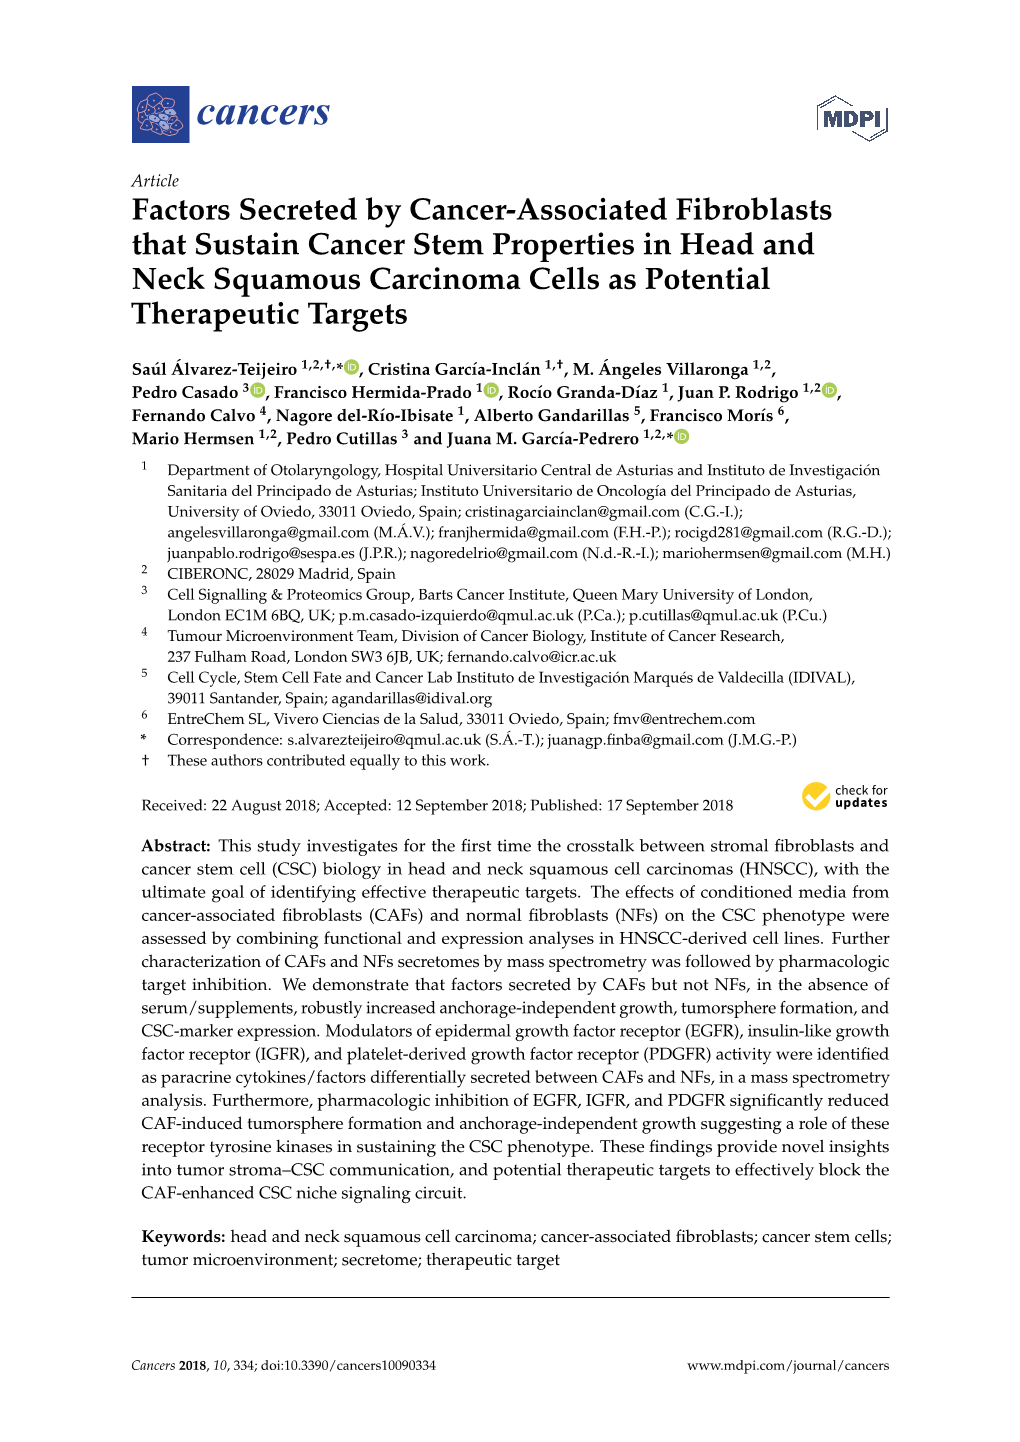 Factors Secreted by Cancer-Associated Fibroblasts That Sustain Cancer Stem Properties in Head and Neck Squamous Carcinoma Cells As Potential Therapeutic Targets